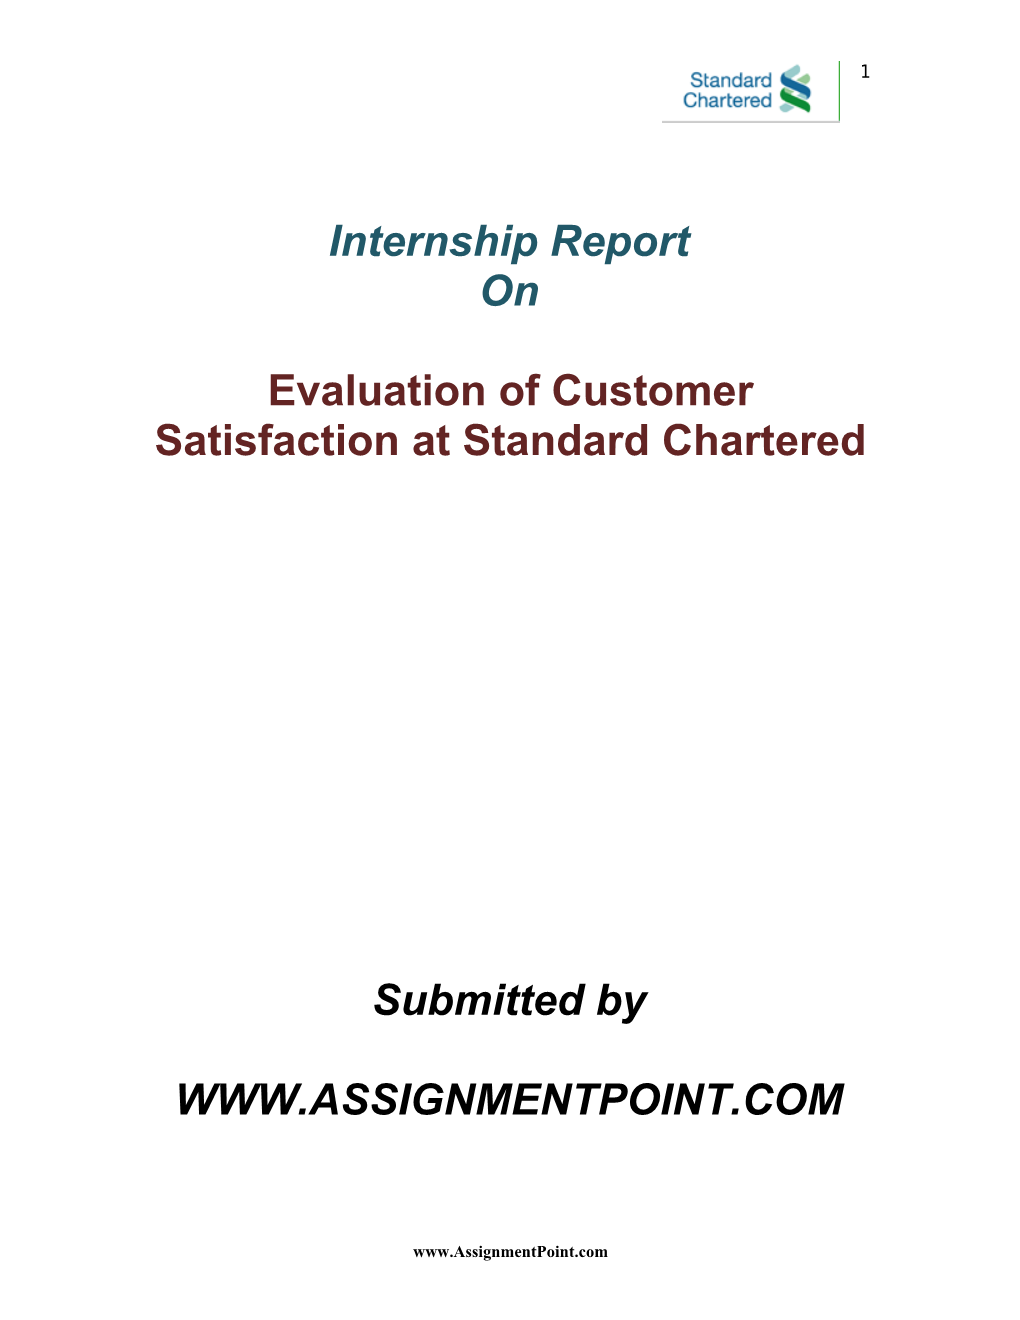 Evaluation of Customer Satisfaction at Standard Chartered